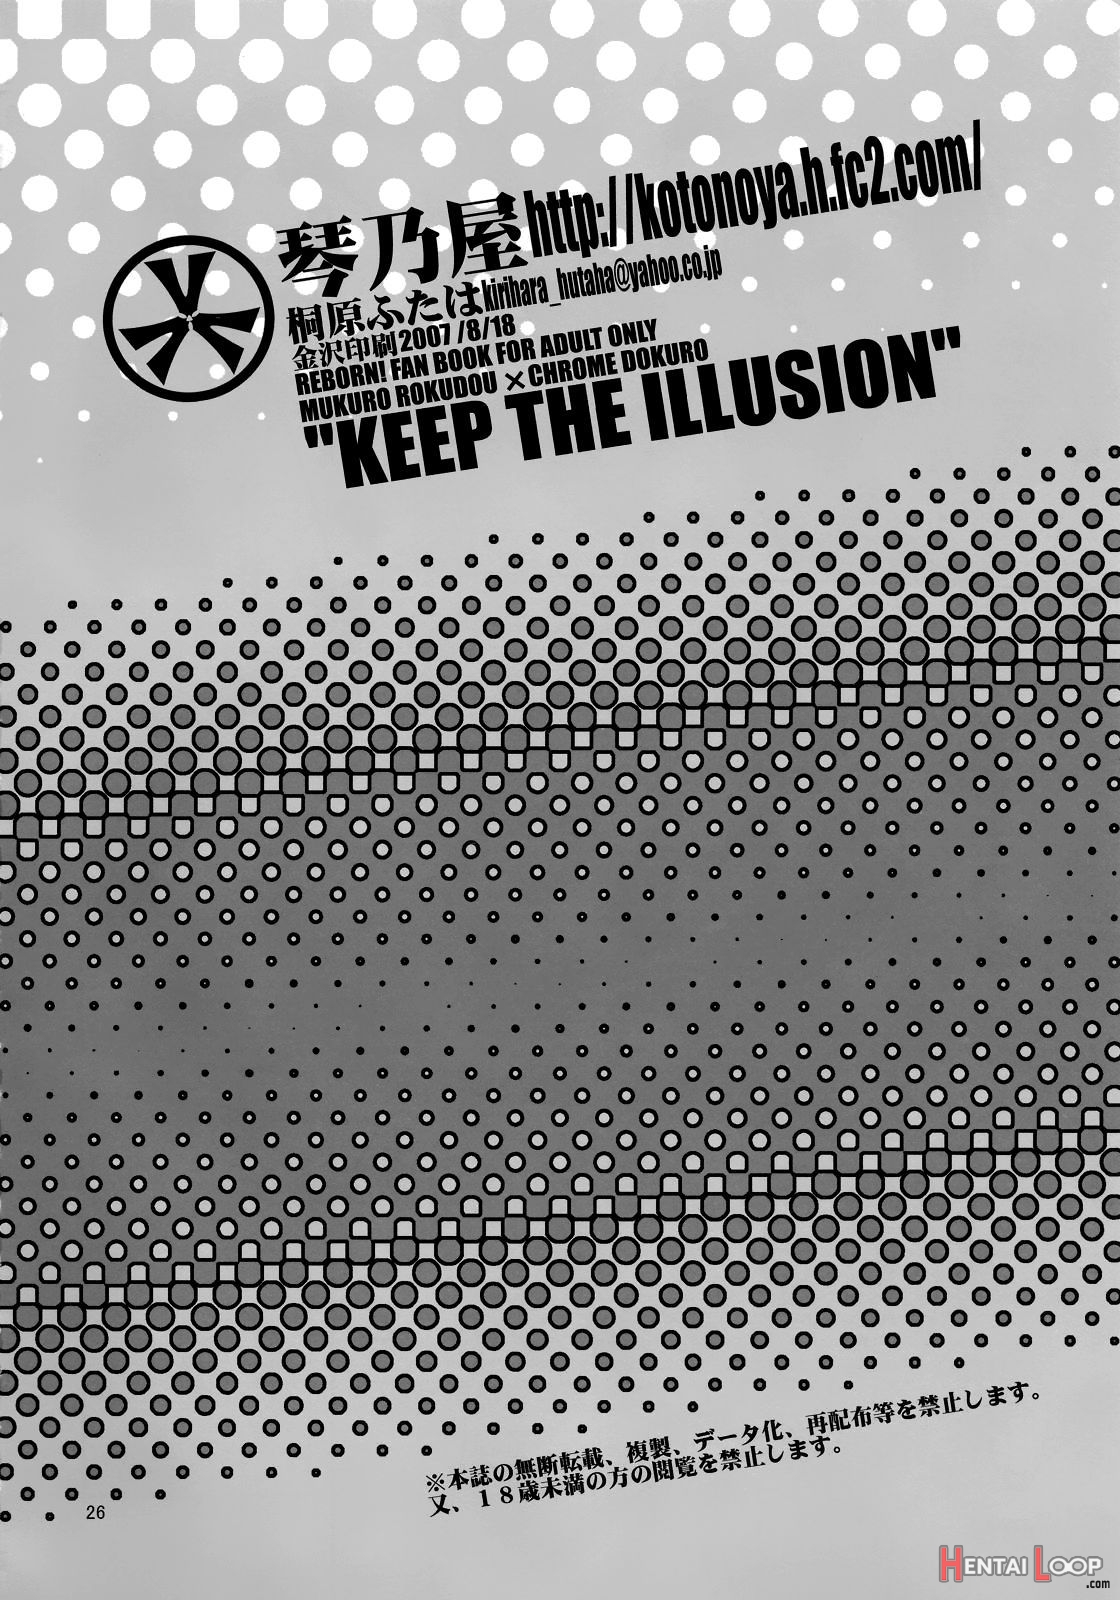 Keep The Illusion page 26